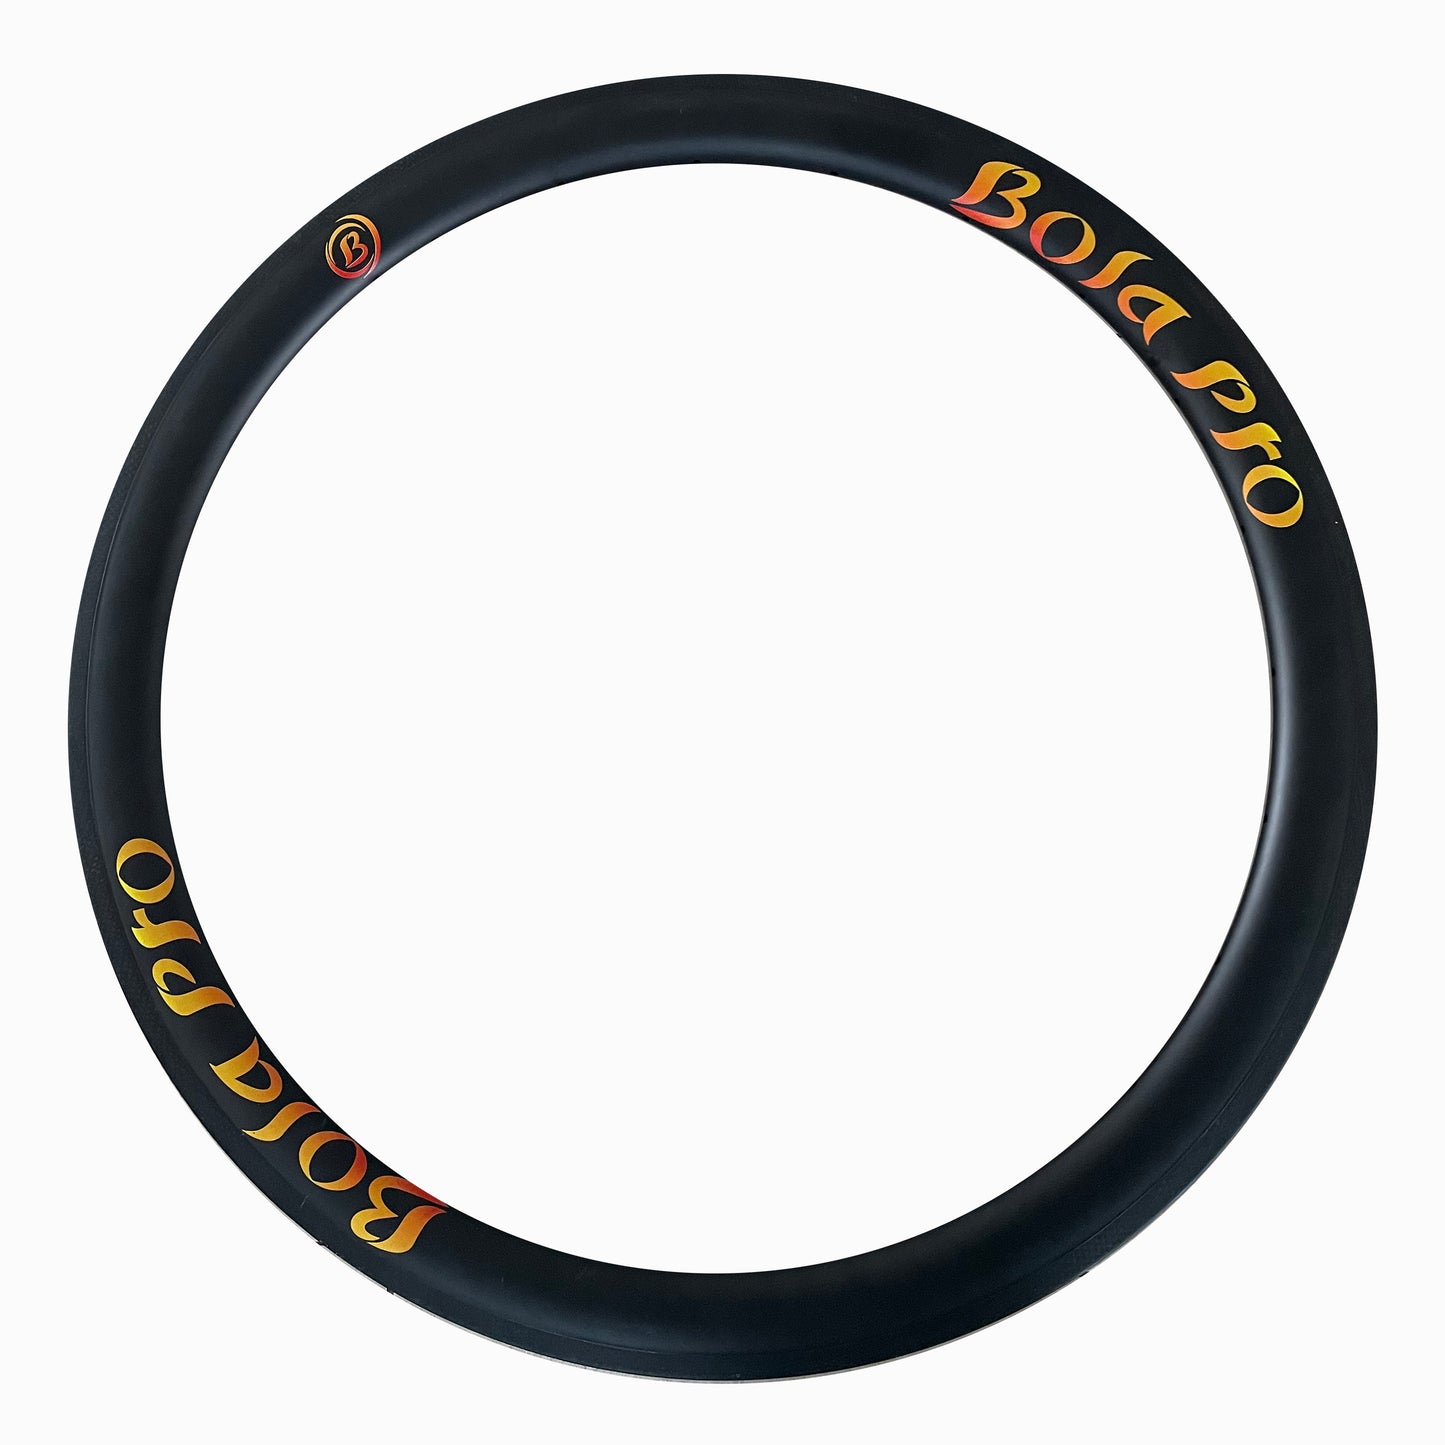 700c asymmetric tubeless ready carbon velo rims 38mm low profile  25mm wide for cyclisme,hook or hookless optional